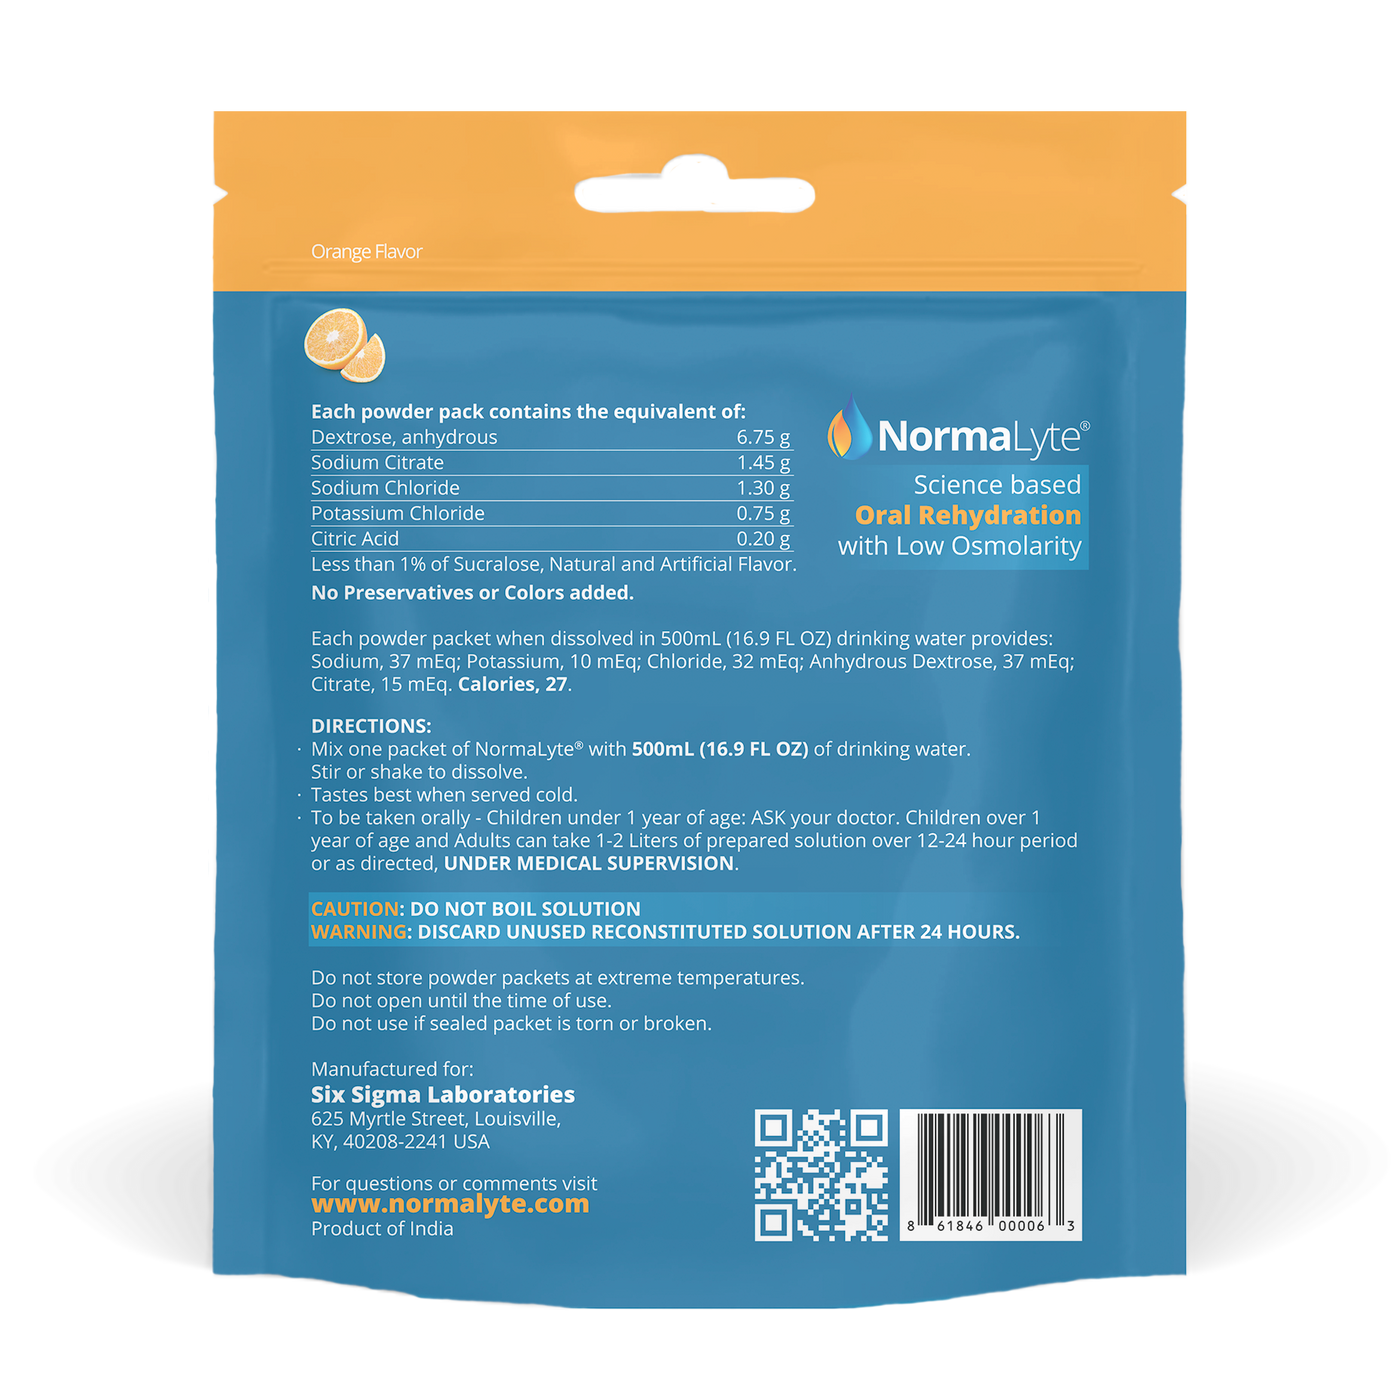 NormaLyte Orange (Oral Rehydration Salts) - Electrolytes, NormaLyte Pack, best drinks for pots patients, supplements for pots syndrome, electrolyte supplement drink mix for pots, normalyte, normalyte drink mix, orange normalyte, supplements for dysautonomia, electrolyte supplement drink mix for dysautonomia